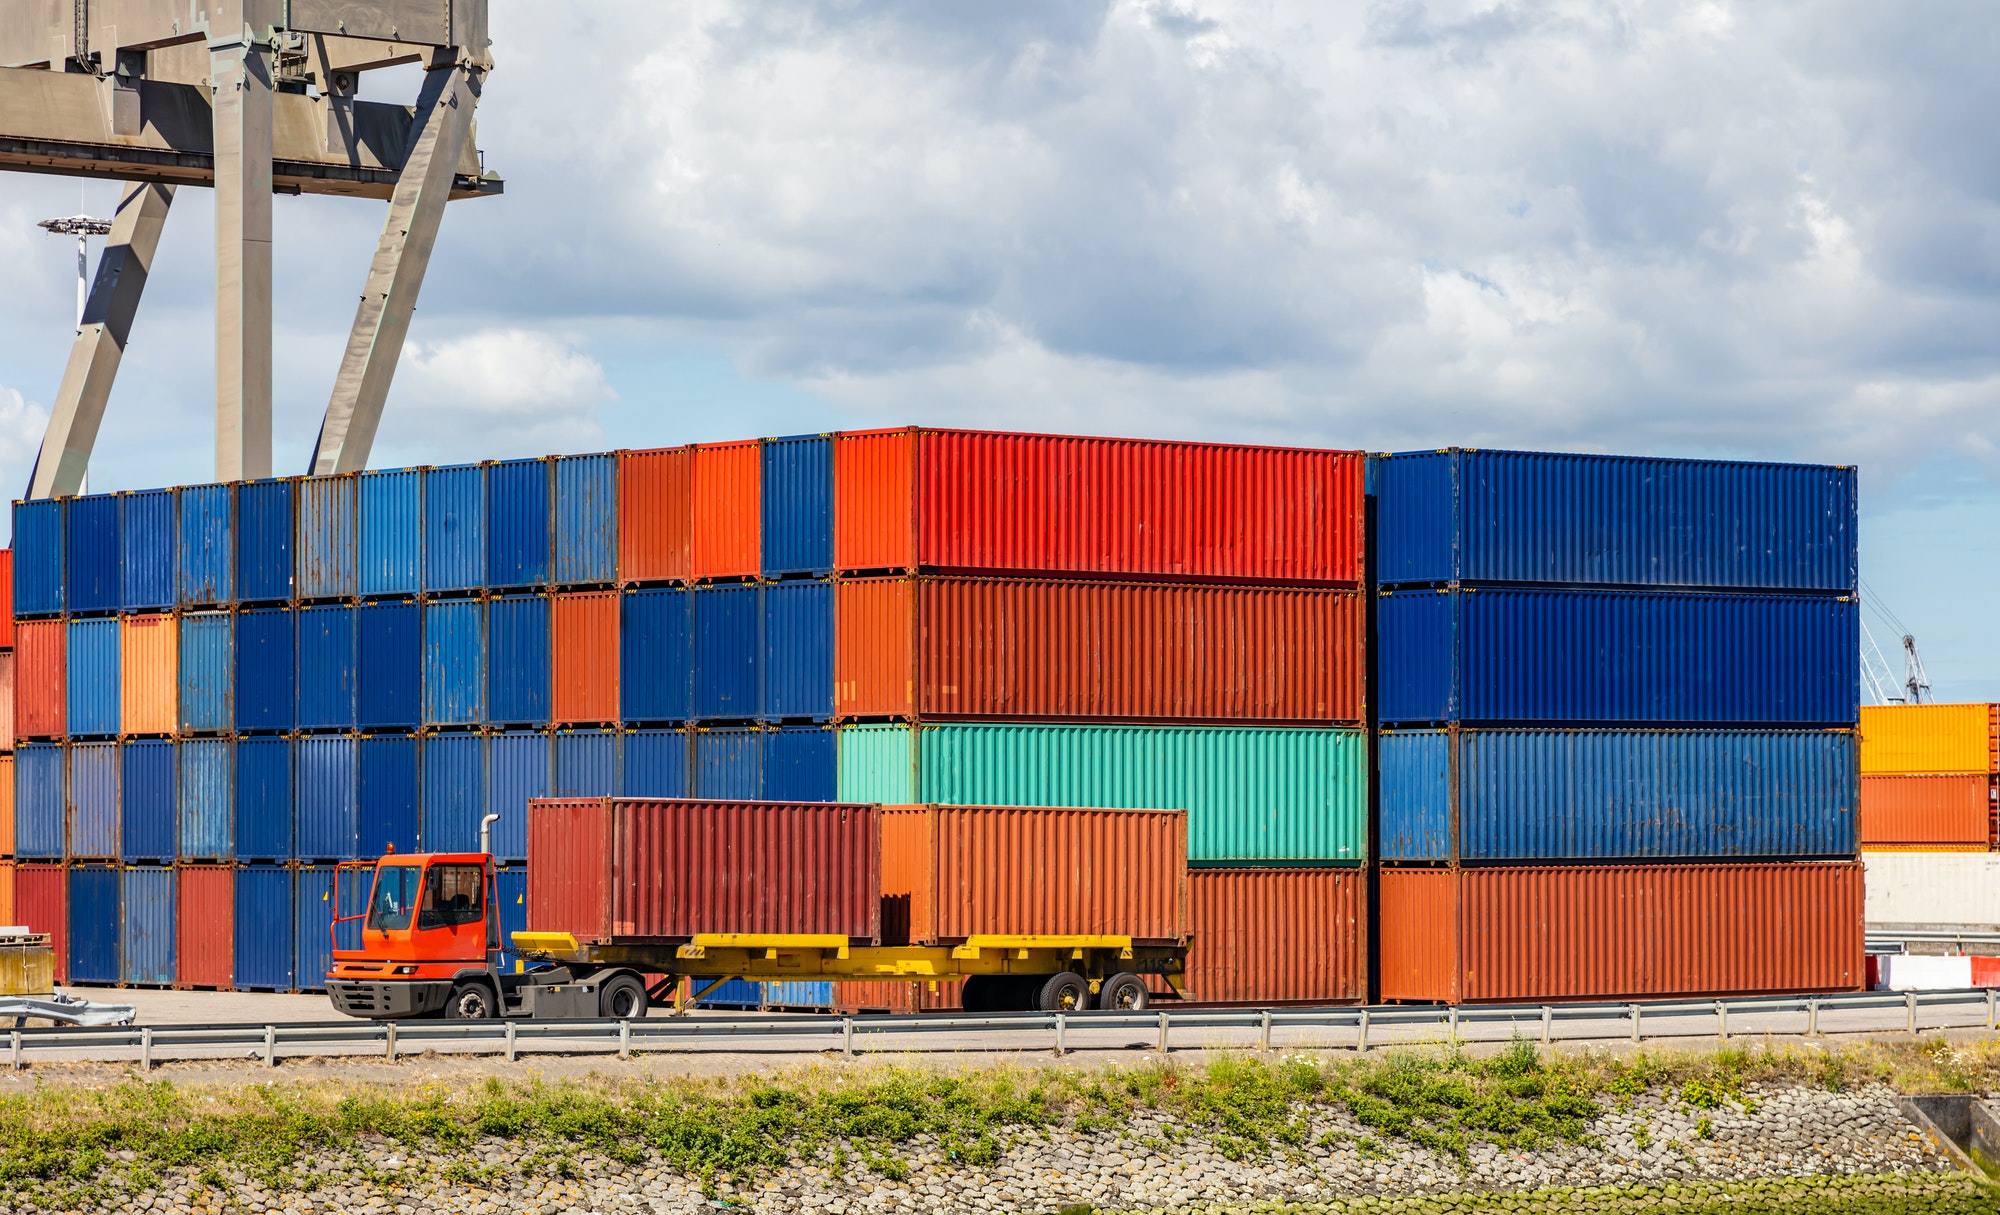 Containers at harbor of Rotterdam, Netherlands. Logistics business, cargo loading unloading